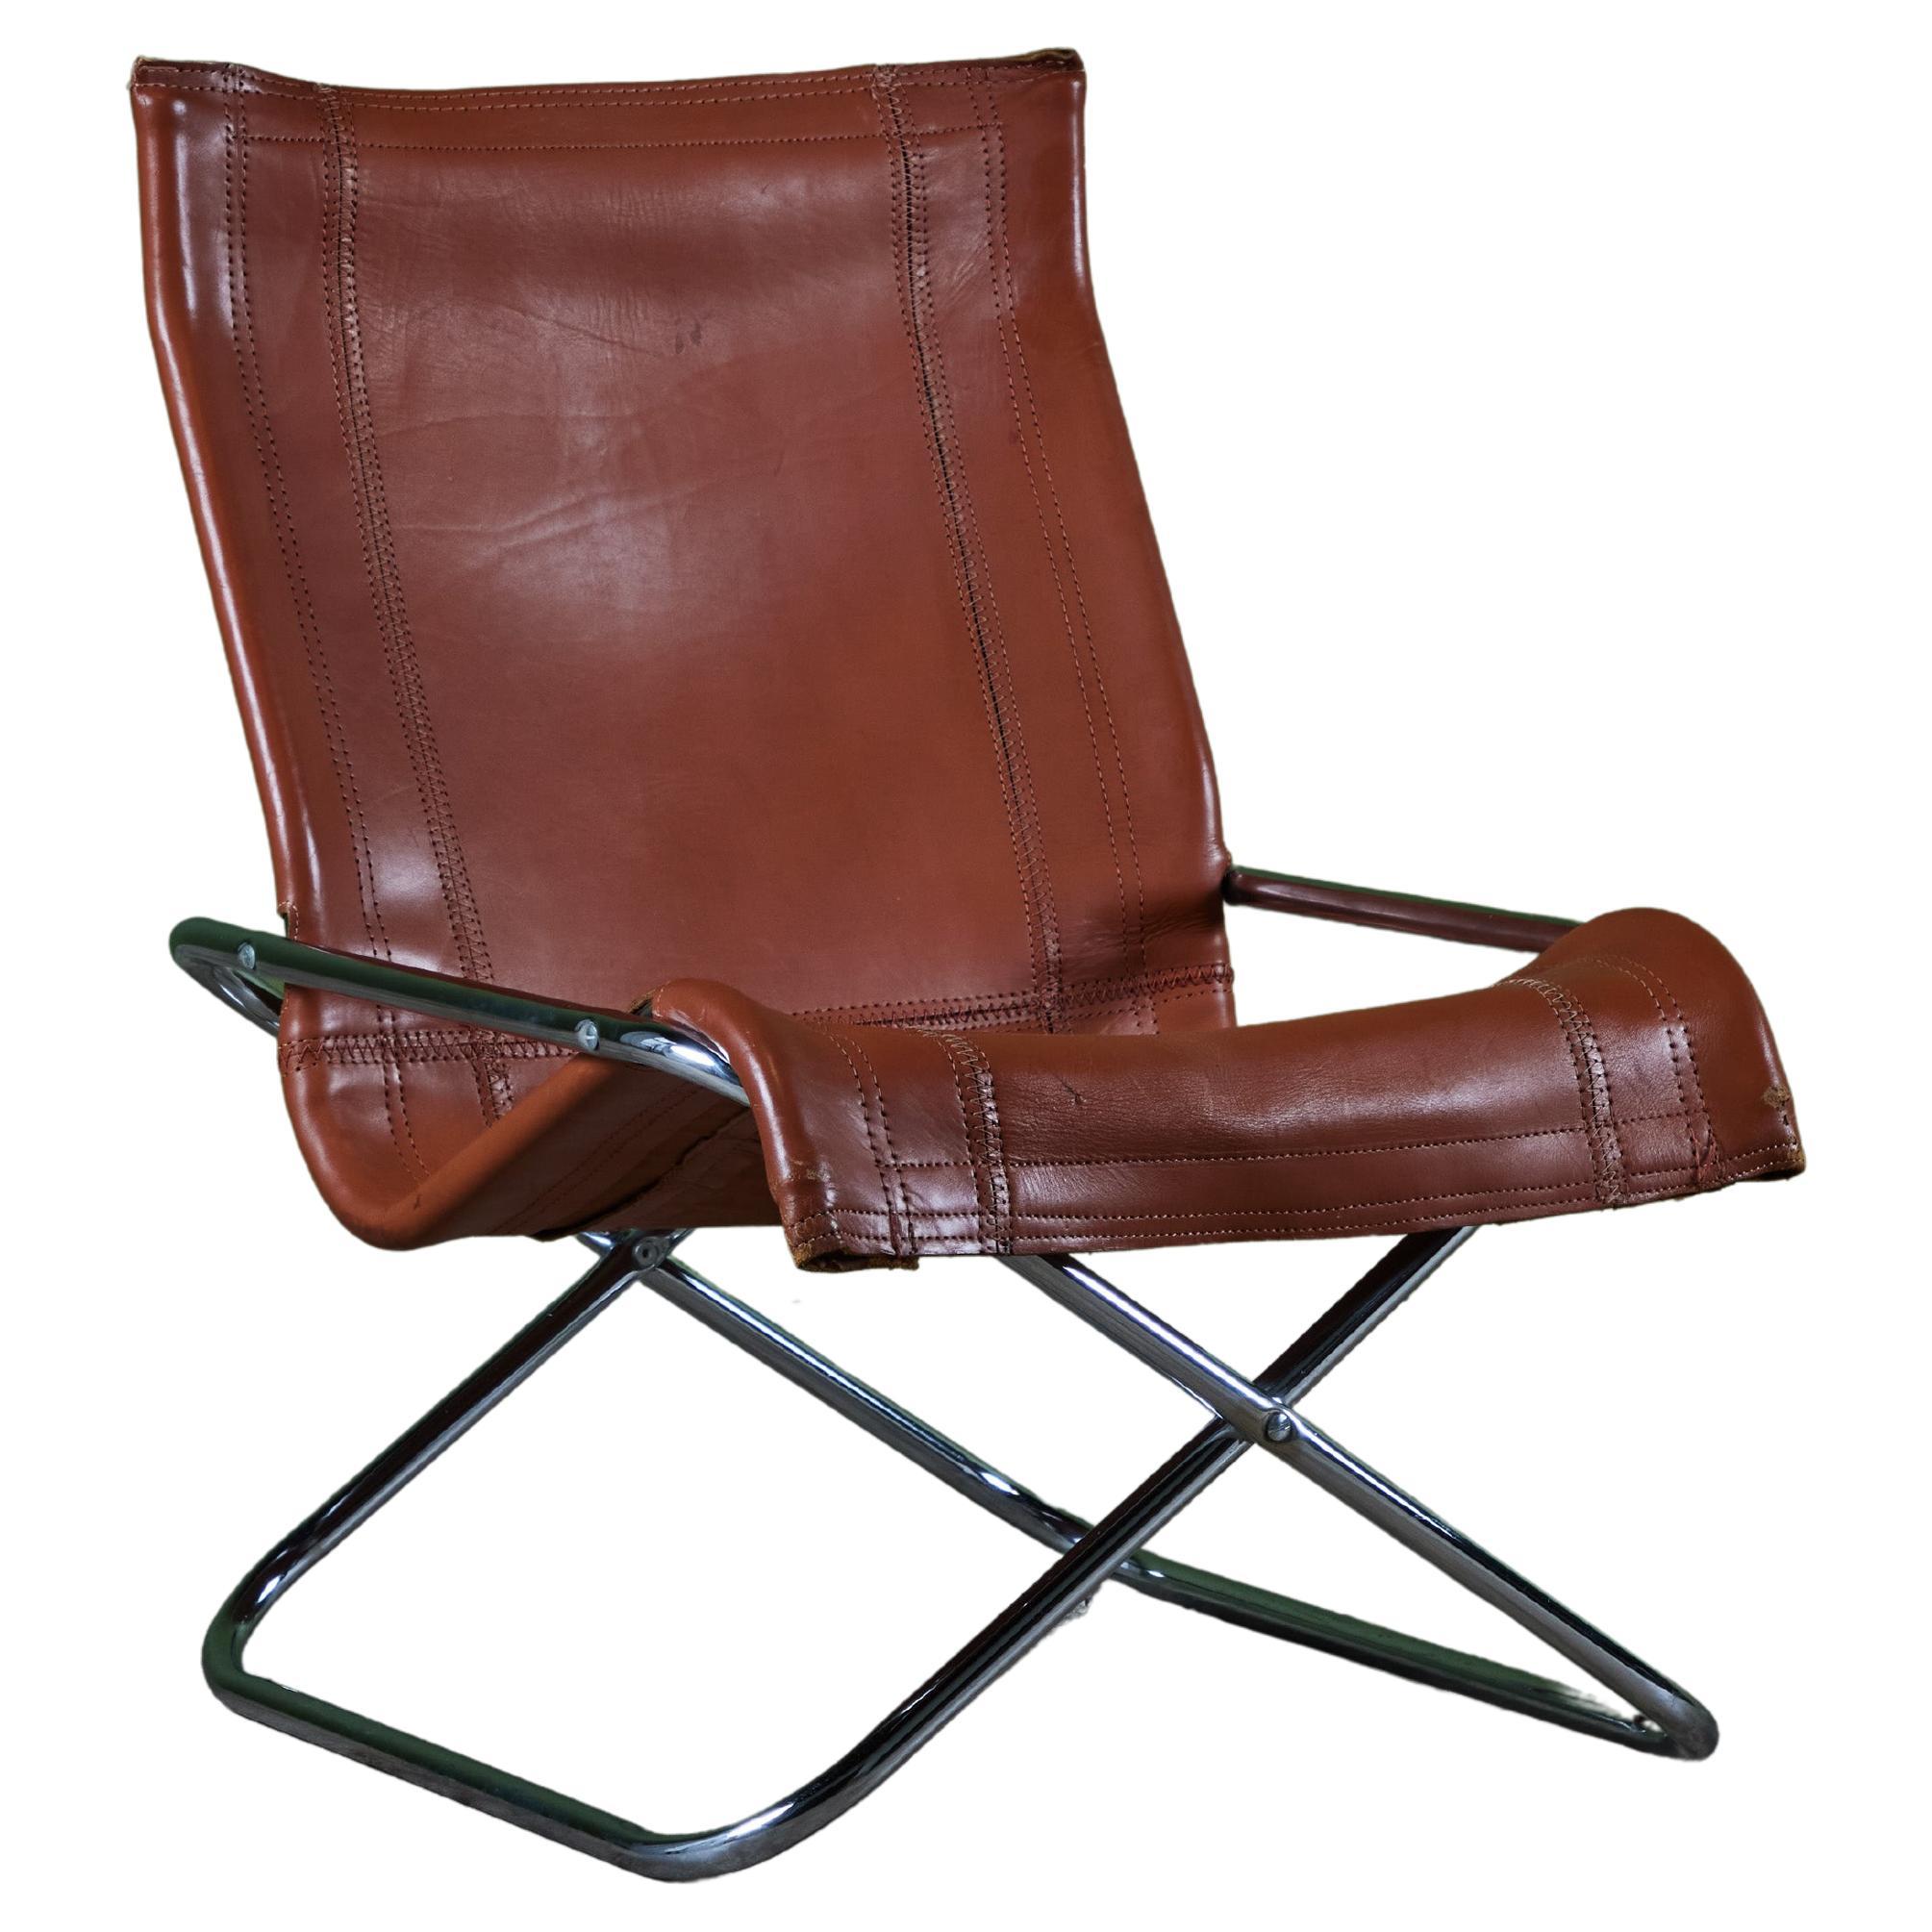 Takeshi Nii 'NY' Japanese Leather Folding Chair For Sale